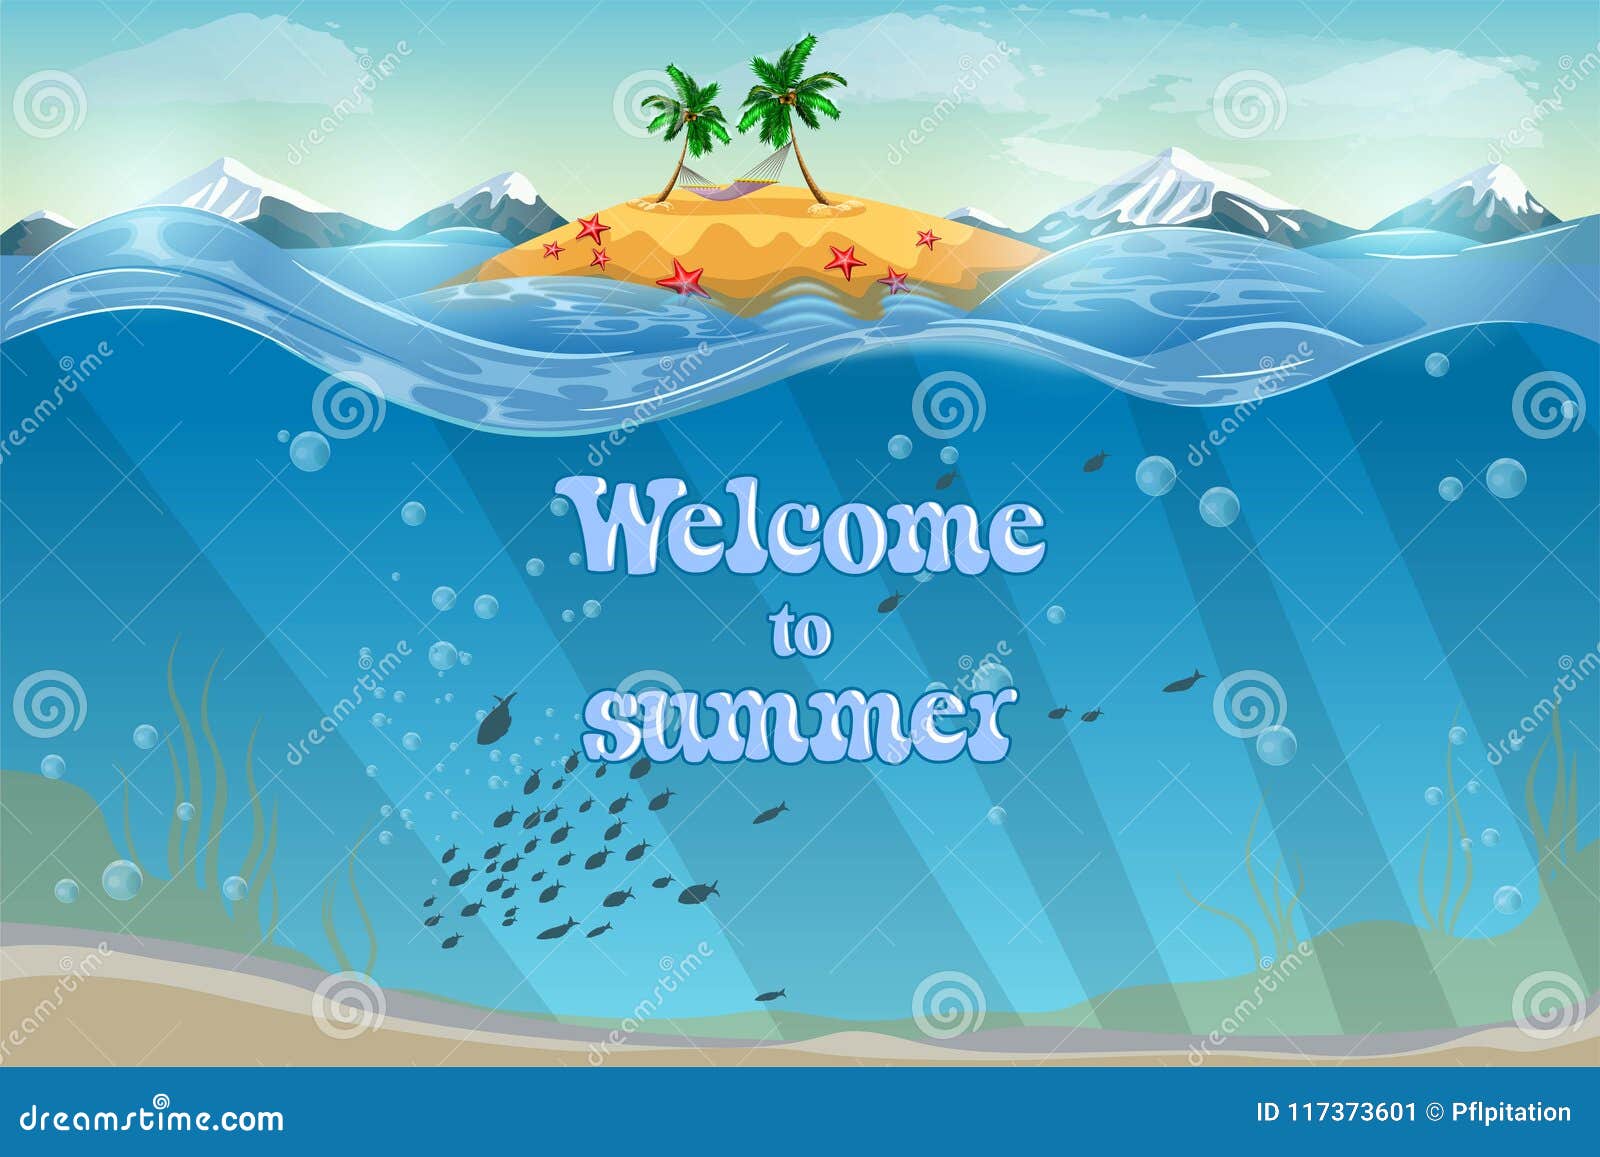 resort topical island. invitation card. underwater coral reef seabed and water surface with tropical isl stock image